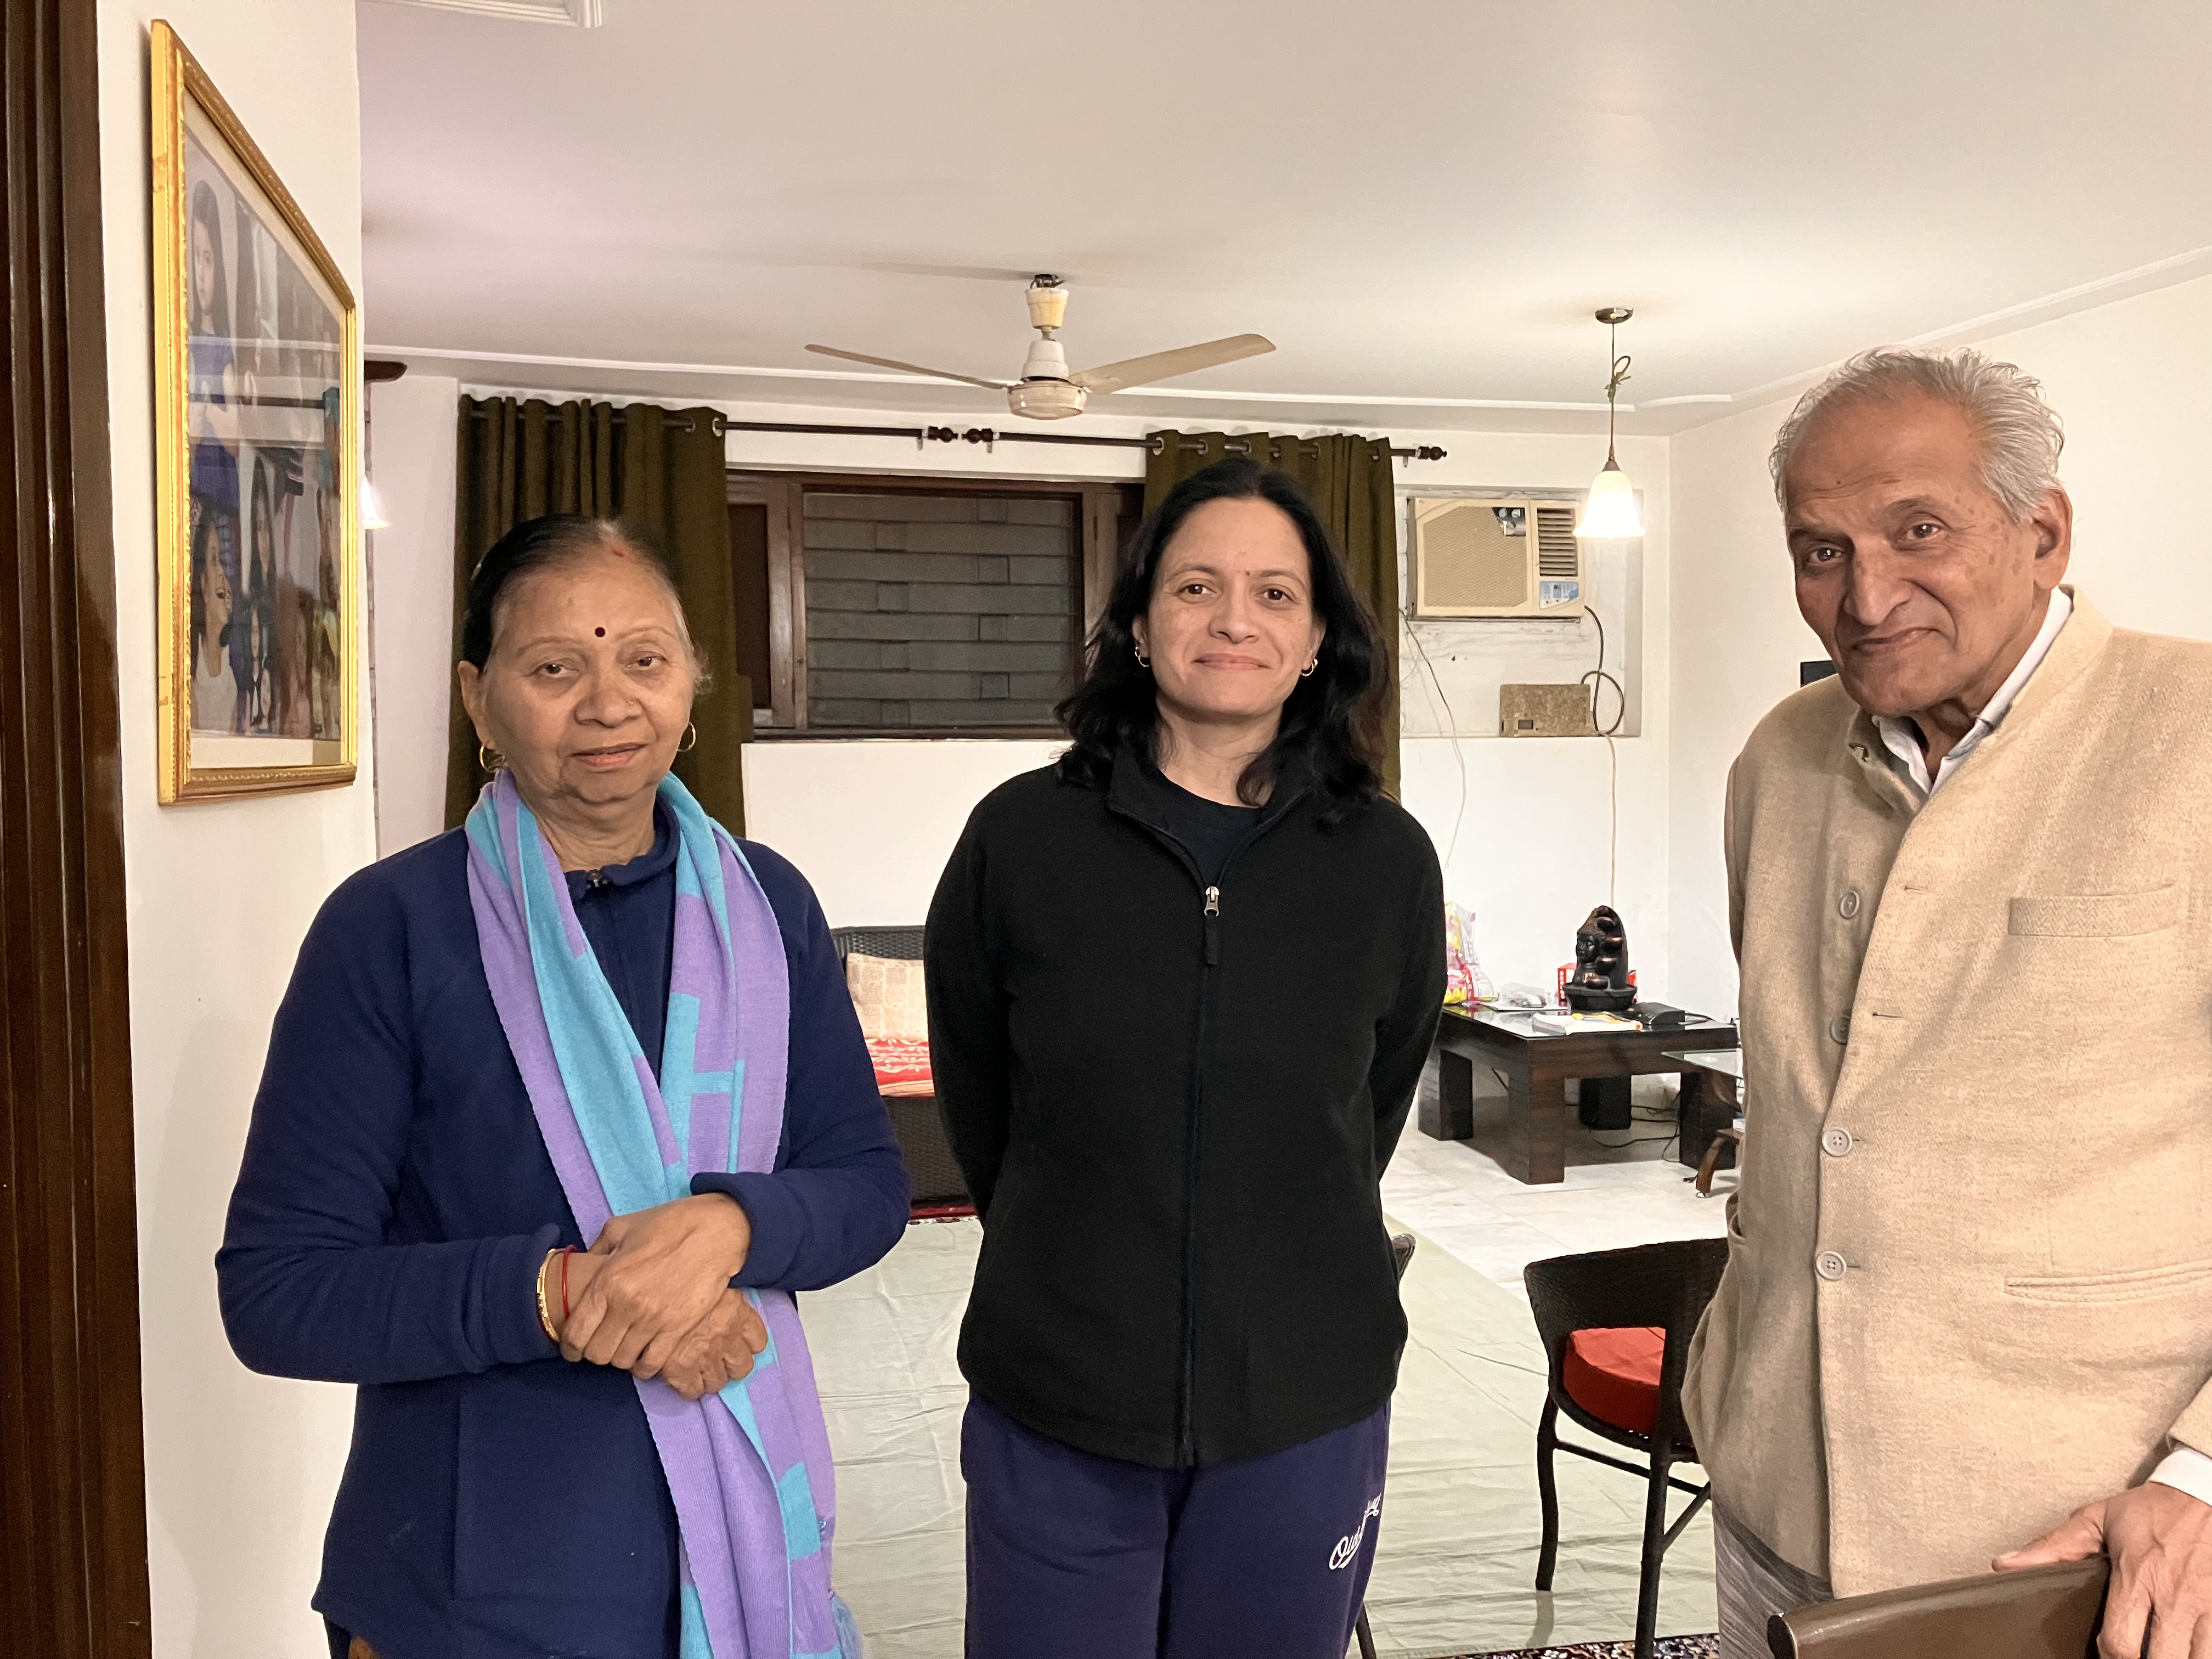 Professor Tripathi with his wife and daughter